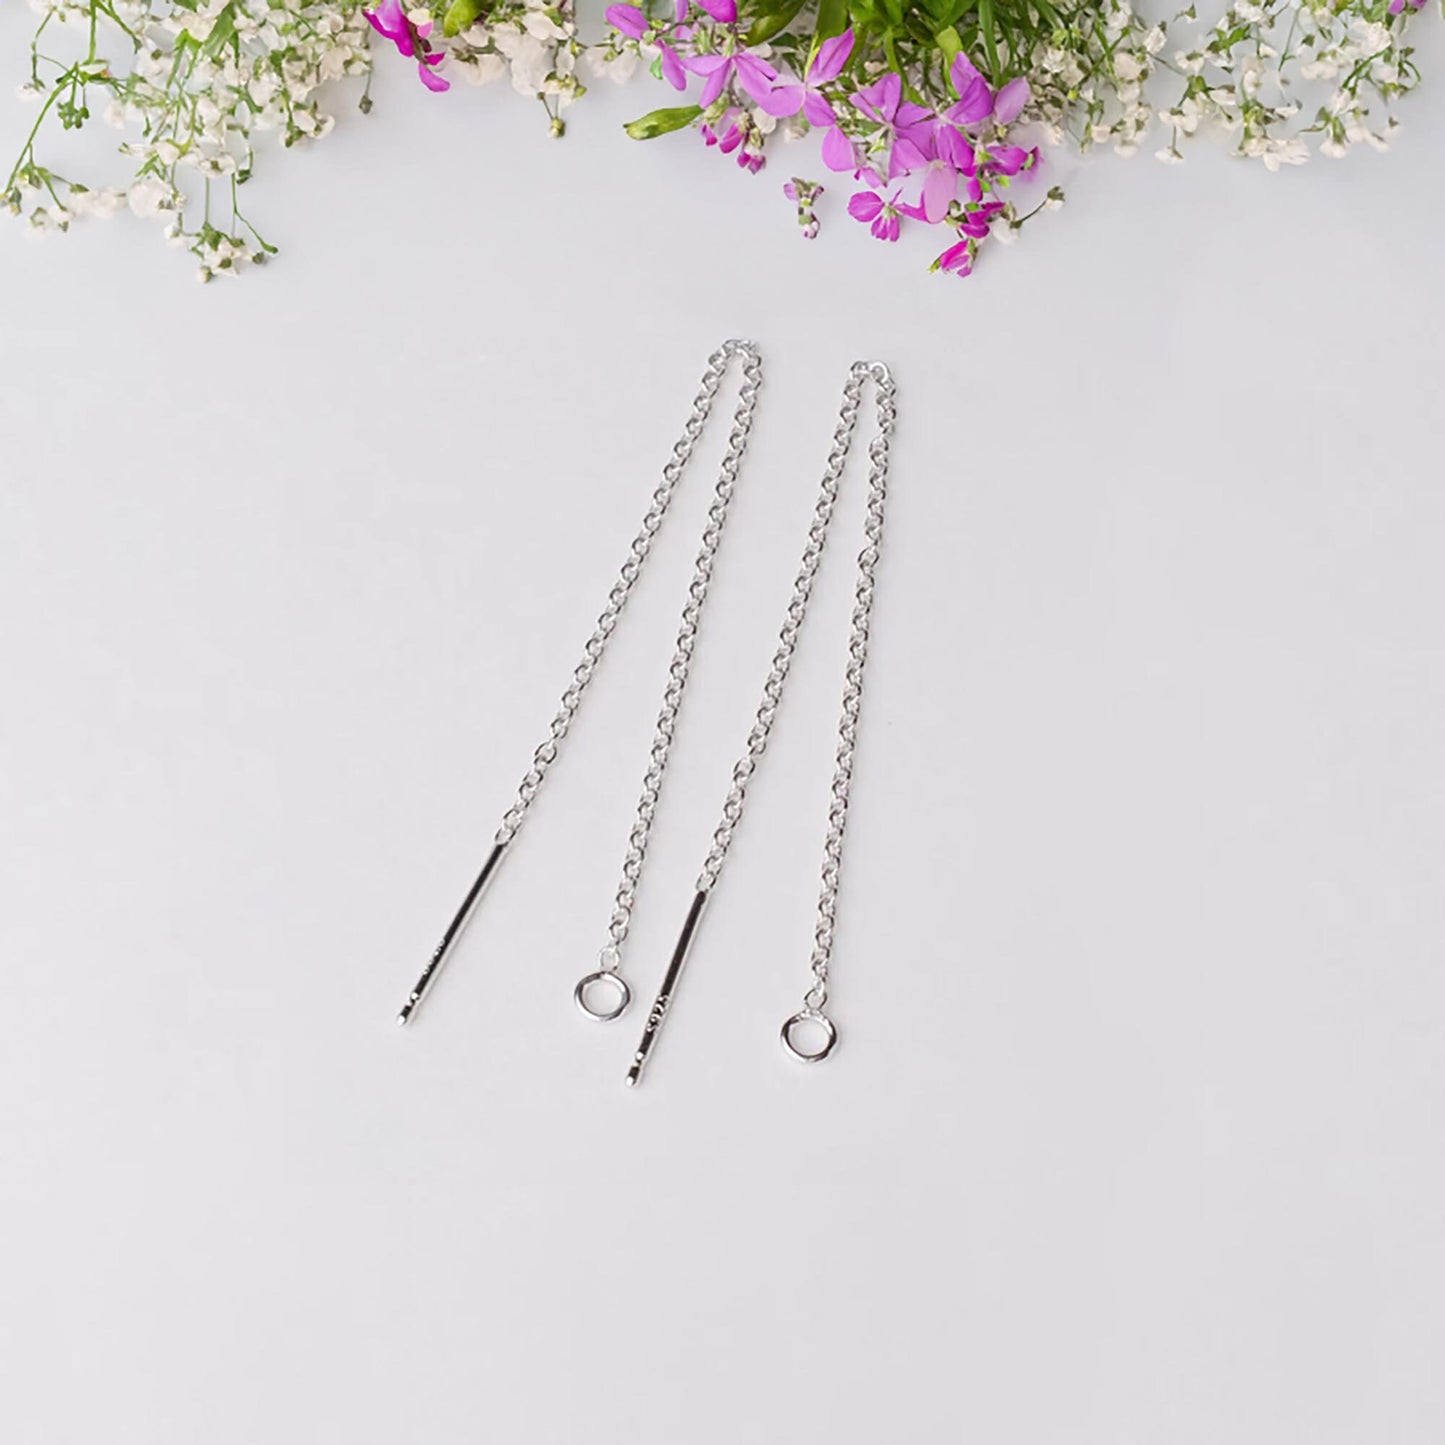 Solid 925 Sterling Silver Ear Thread, 1.2mm Cable Link Chain Earwire with Loop, DIY Pendant Connector, Hypoallergenic Earring Supplies